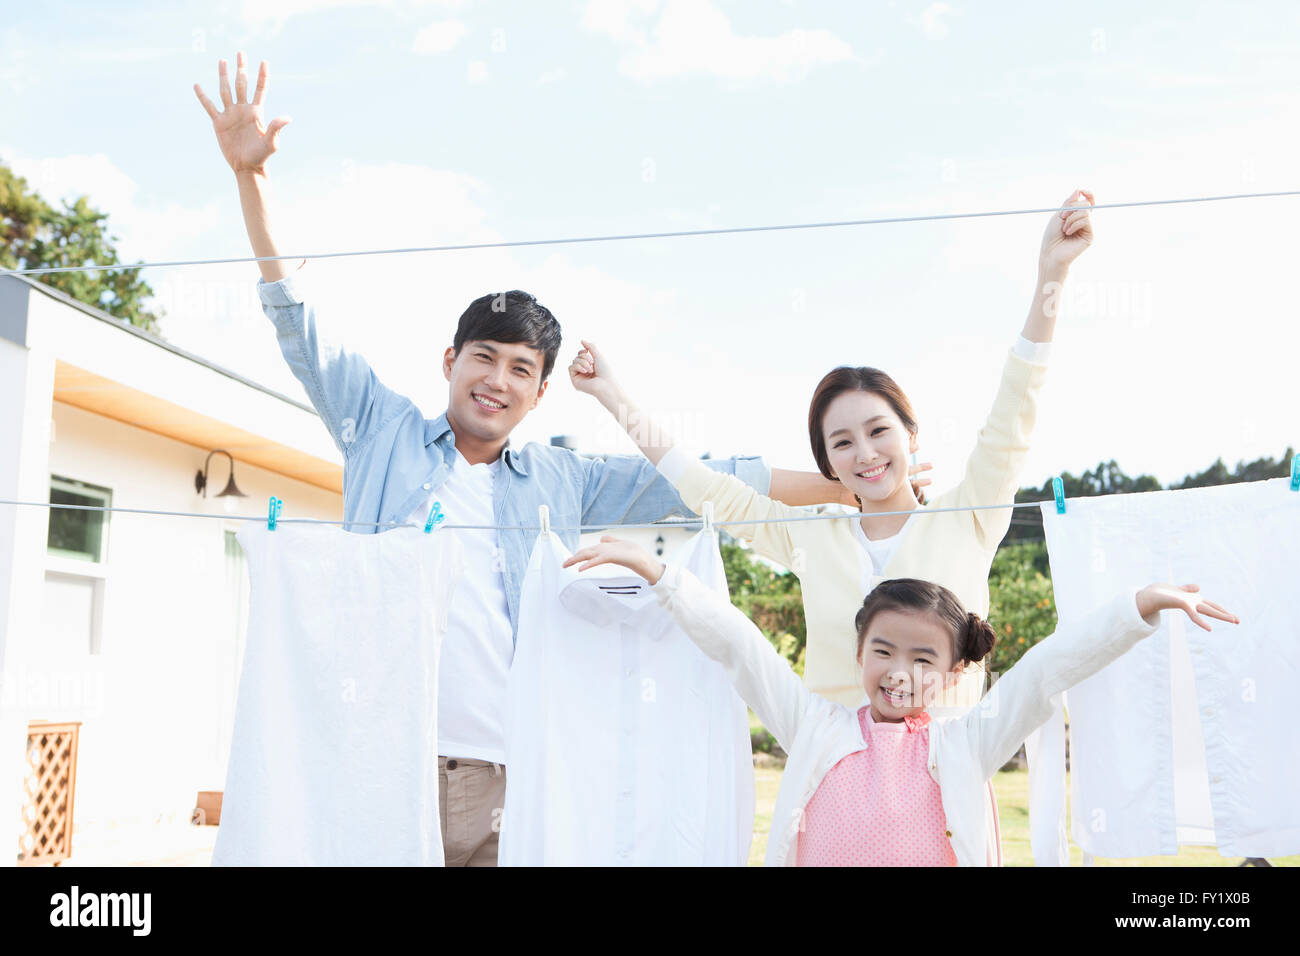 Family being happy doing laundry together at the yard of their house representing rural living Stock Photo